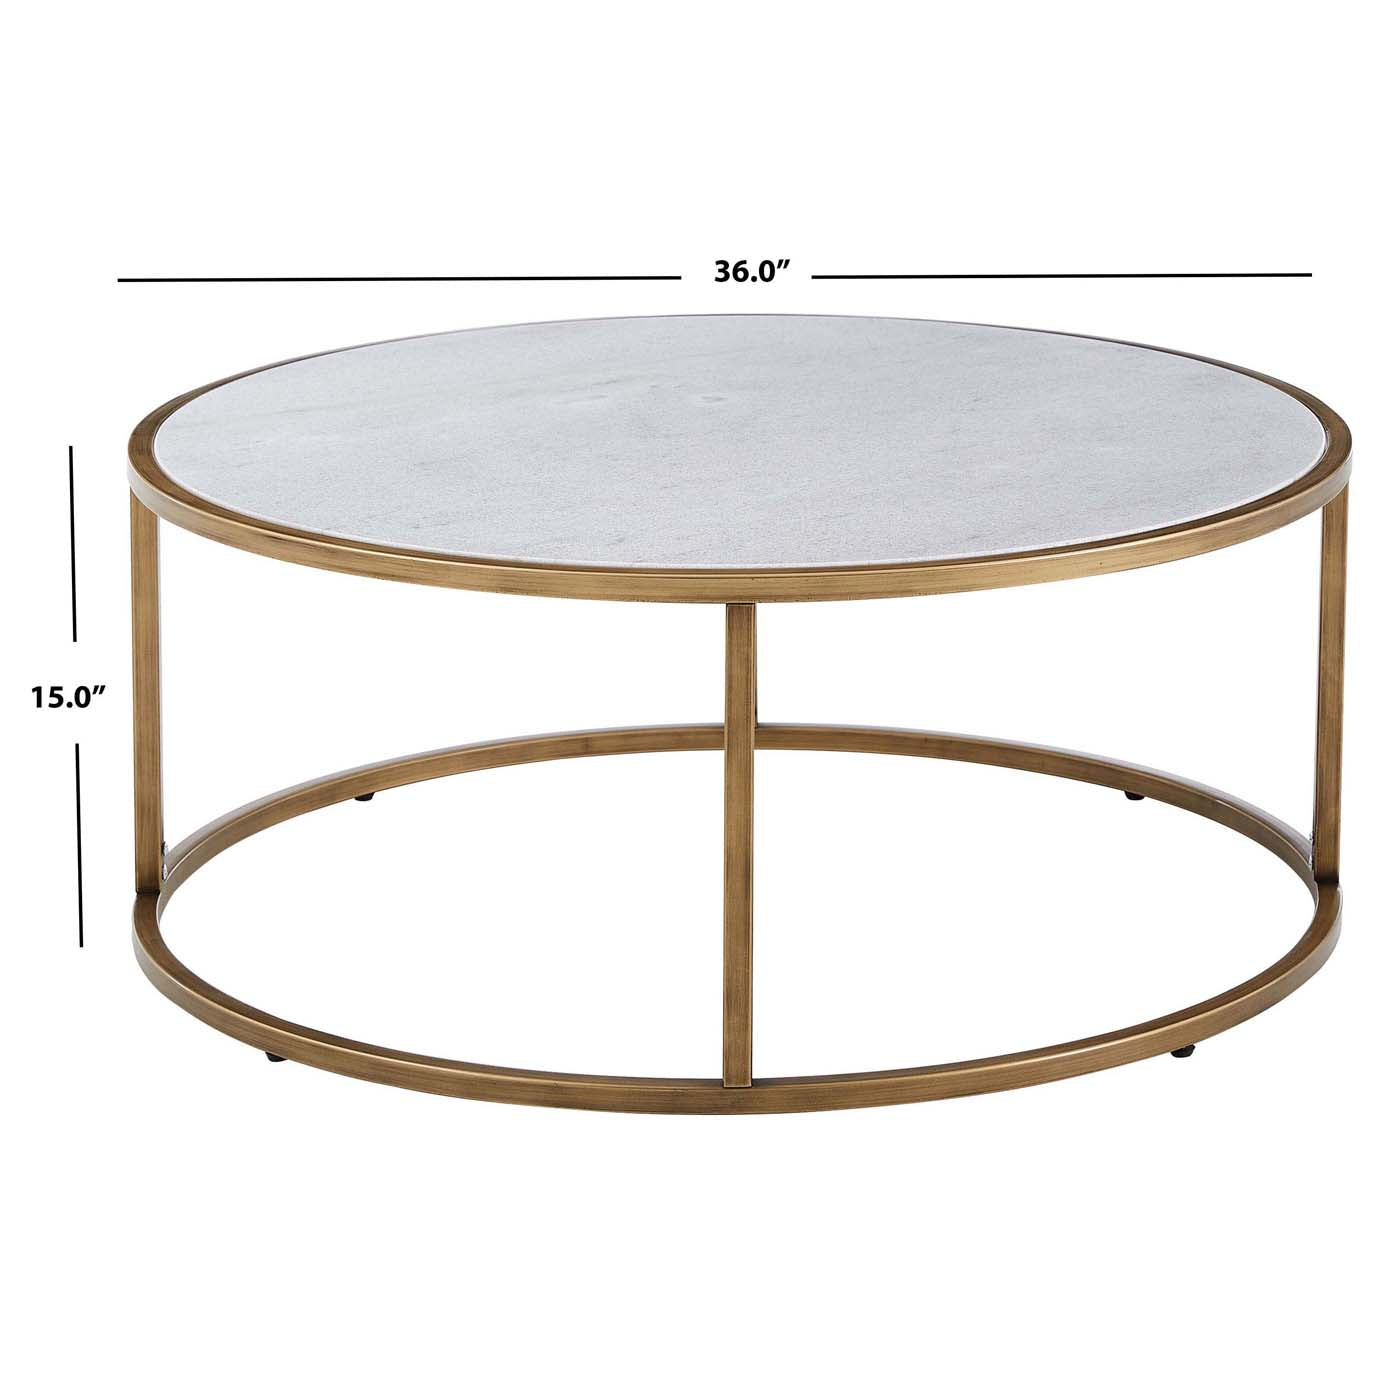 Safavieh Couture Brynna Round Marble Coffee Table - White / Bronze